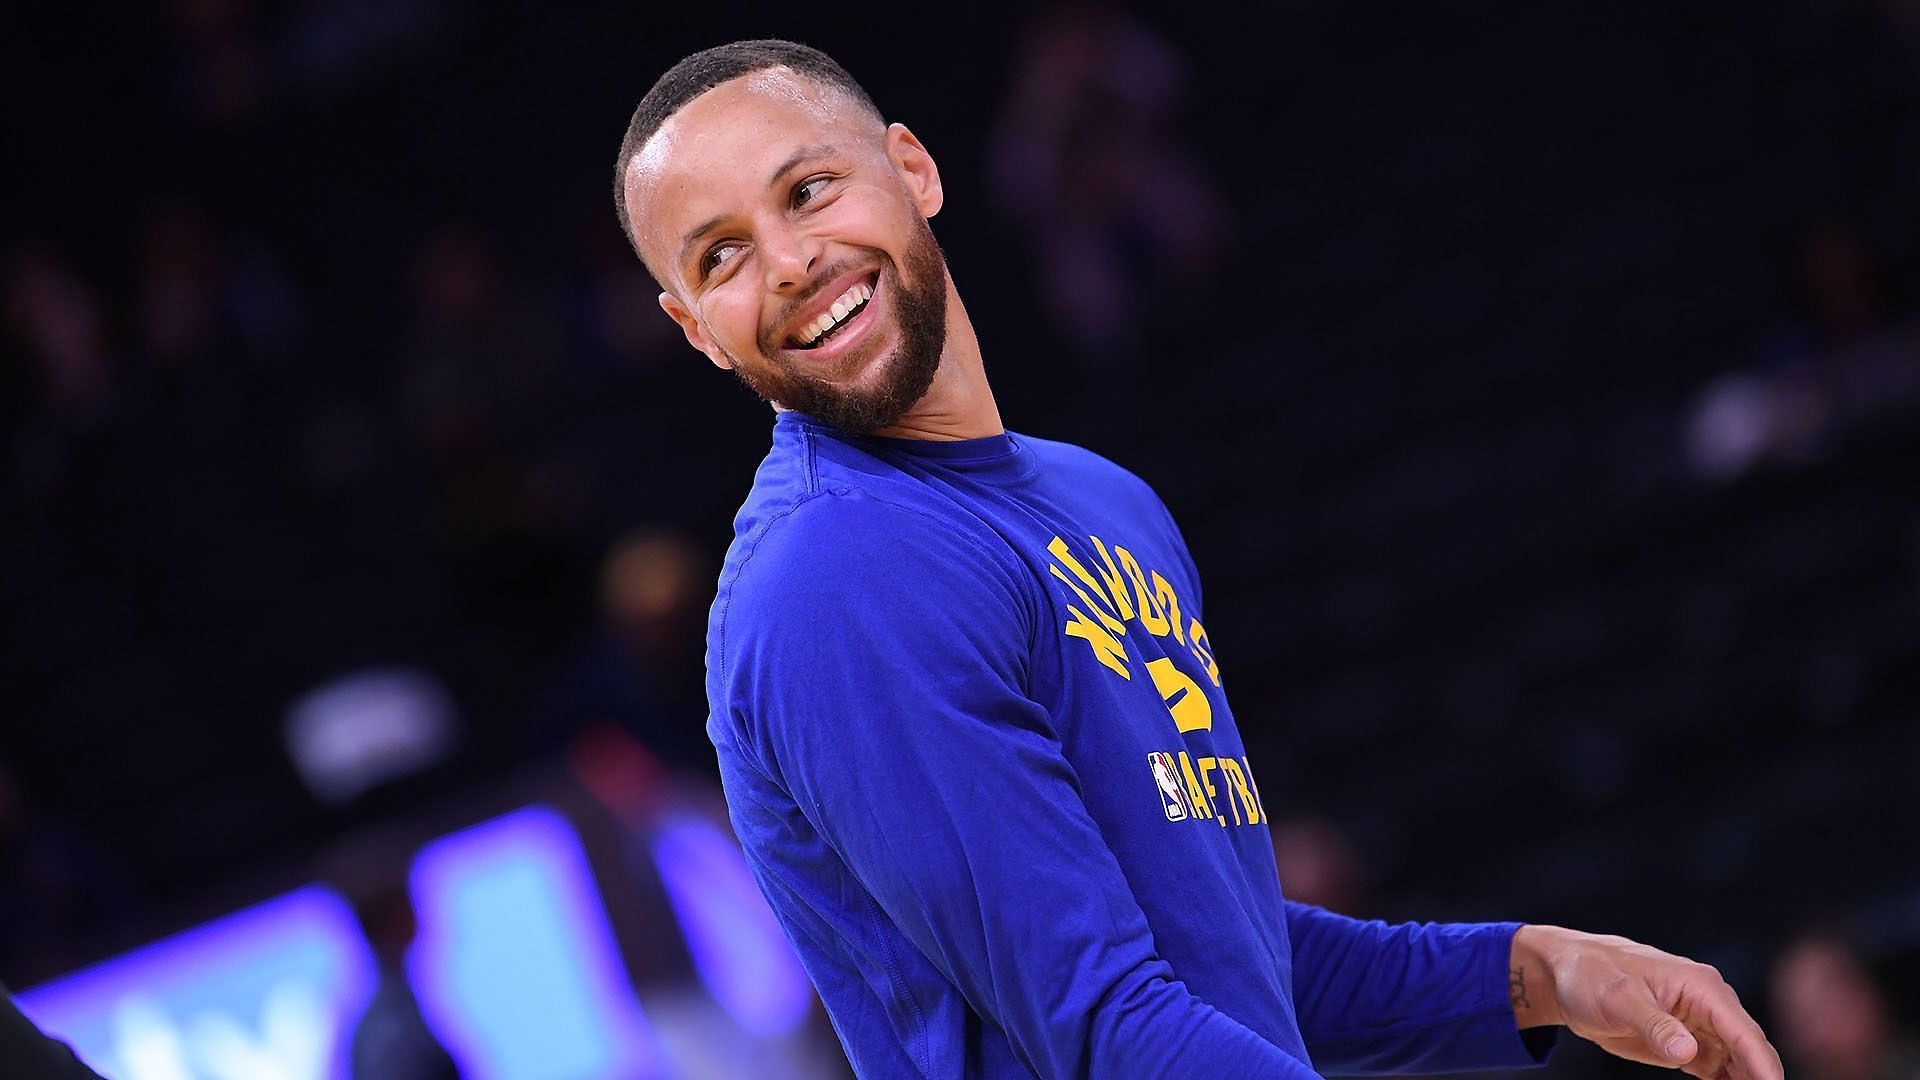 i-haven-t-seen-it-did-he-say-something-crazy-steph-curry-reveals-he-hasn-t-watched-draymond-green-s-documentary-which-addressed-his-punch-at-jordan-poole